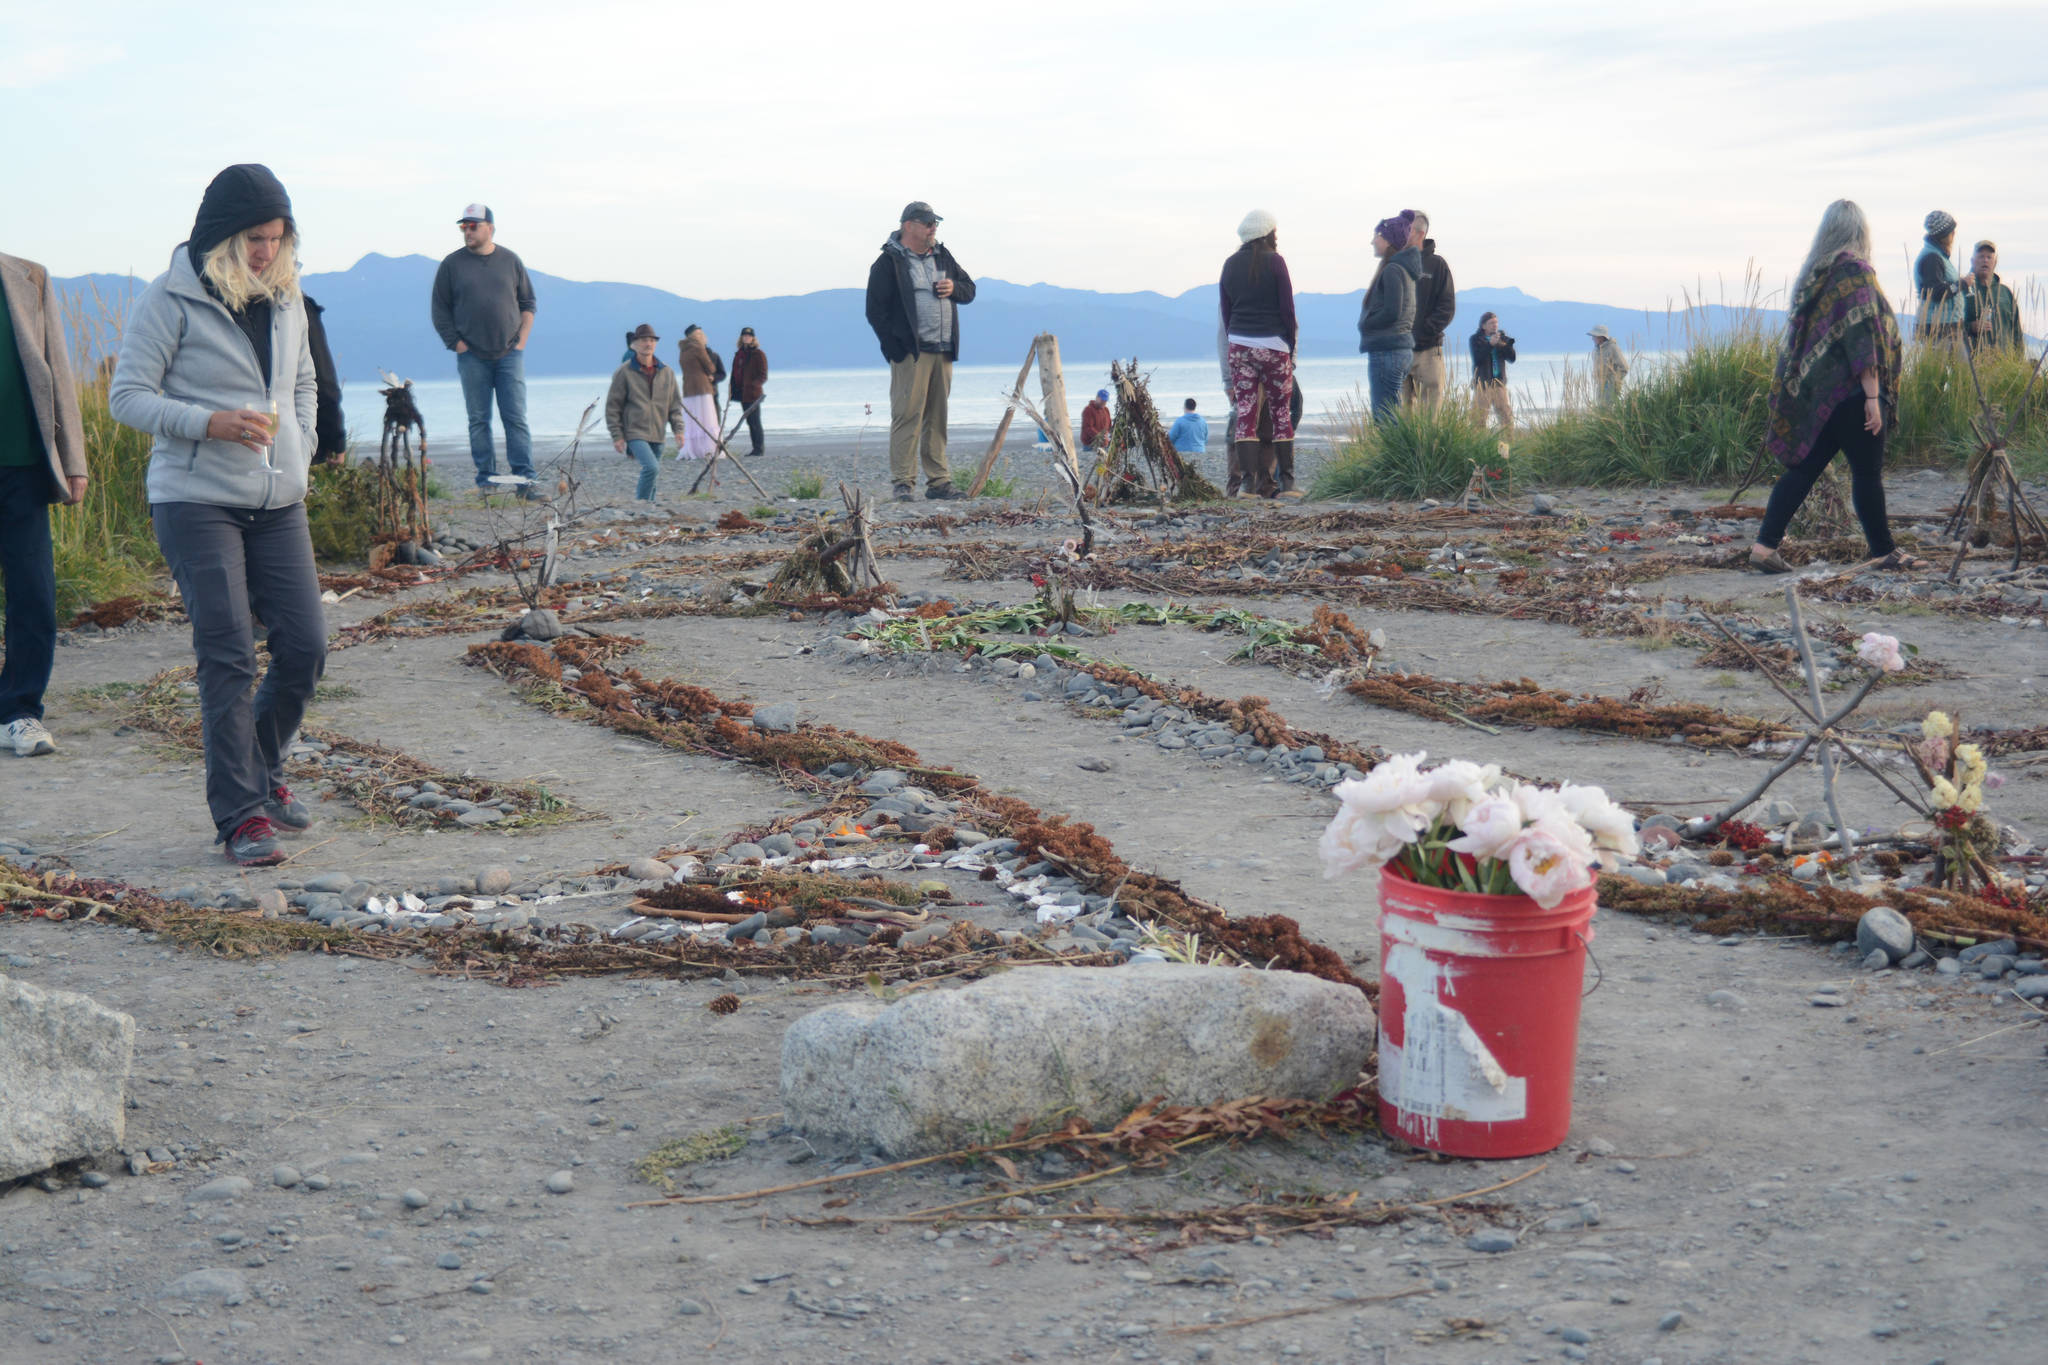 People walk the labyrinth at the 2018 Burning Basket, Dream, on Sept. 9 at Mariner Park, Homer, Alaska. (Photo by Michael Armstrong/Homer News)